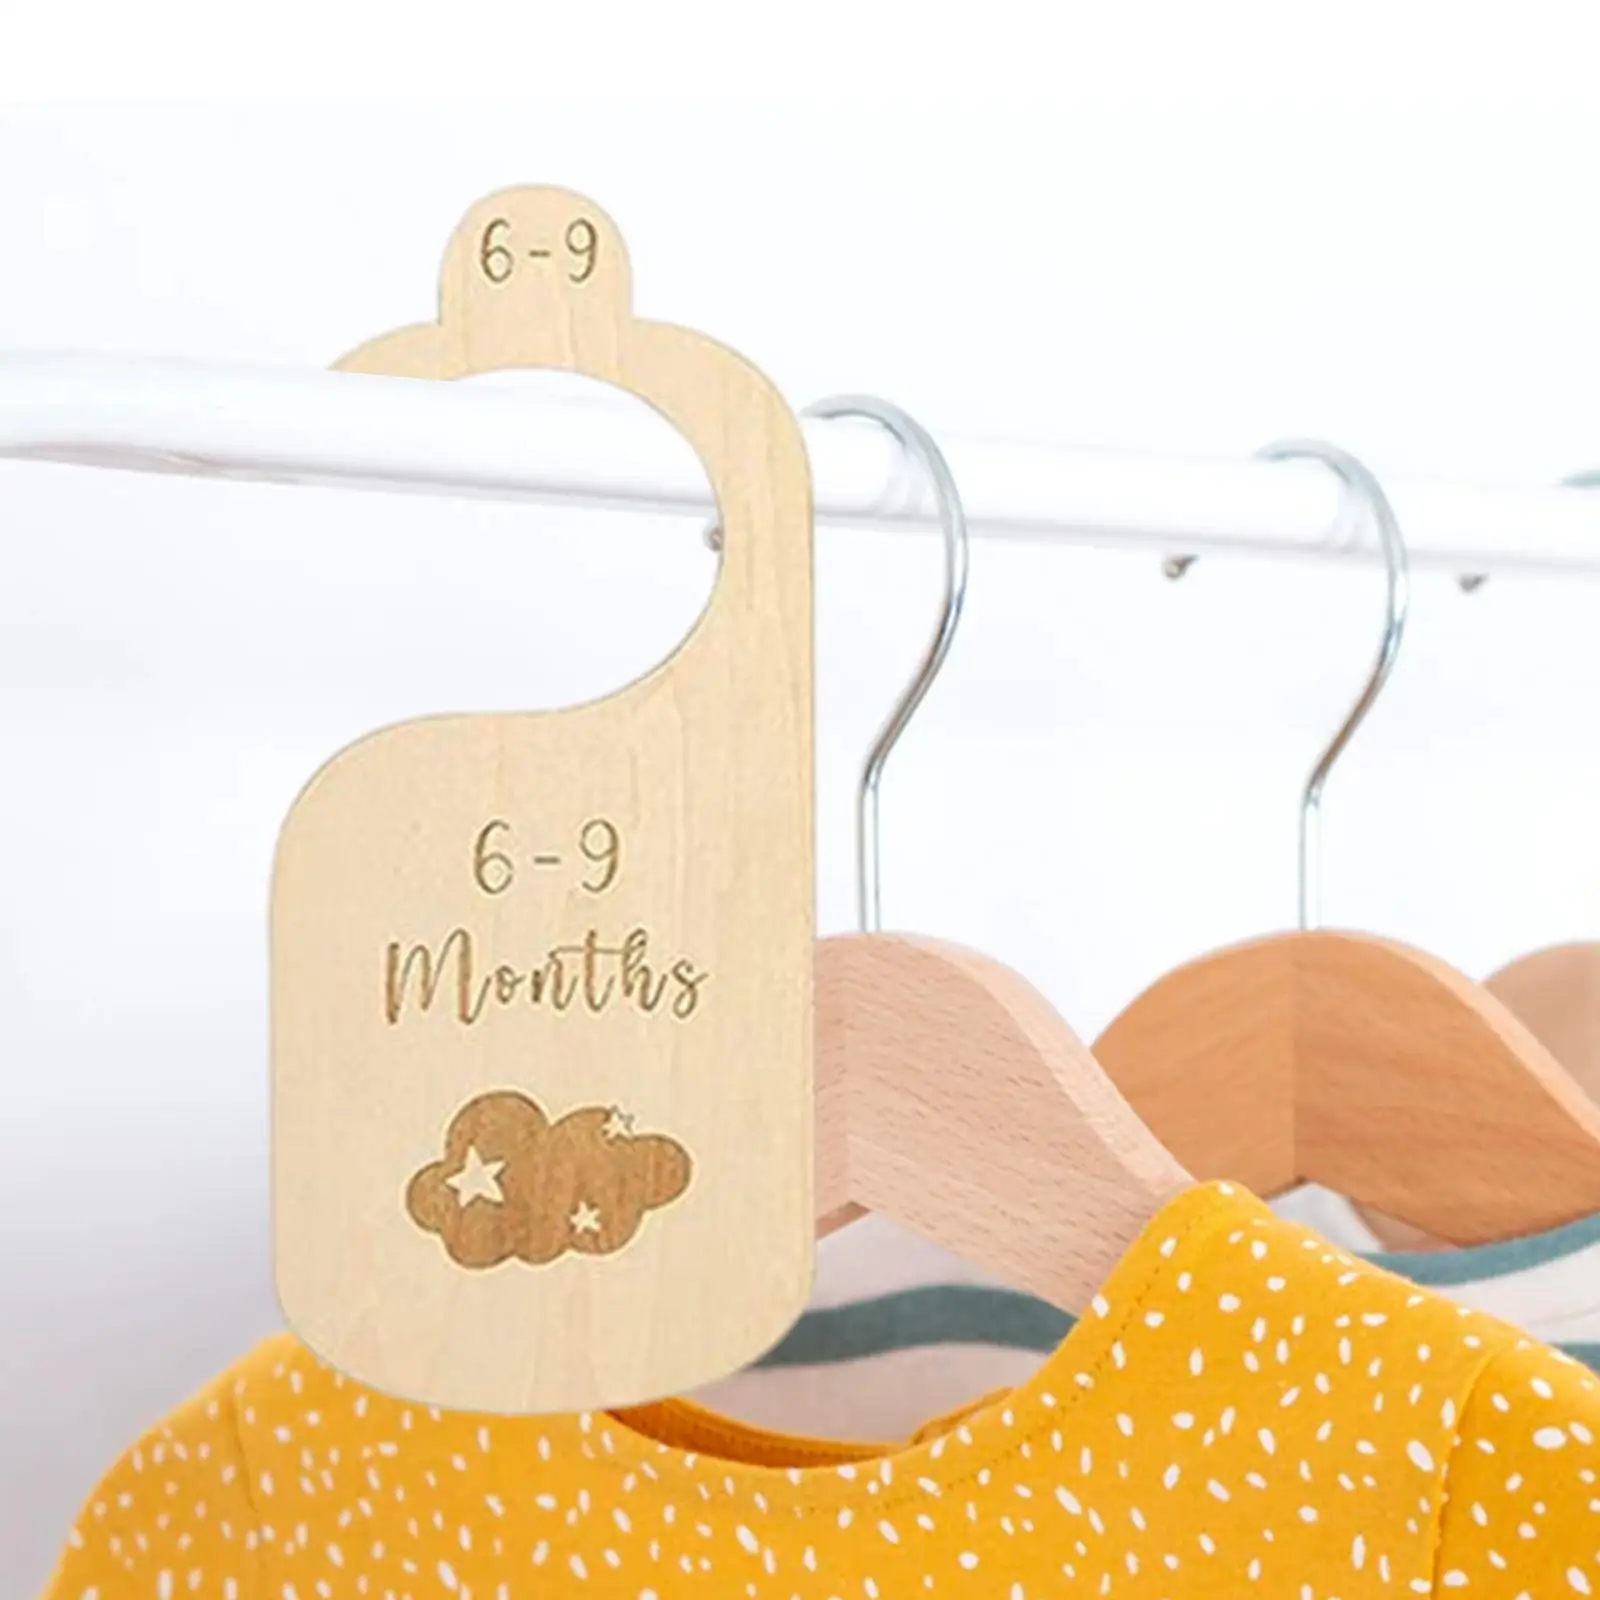 7x Adorable Newborn Baby Toddler Clothes Dividers Nursery Clothes Organizers